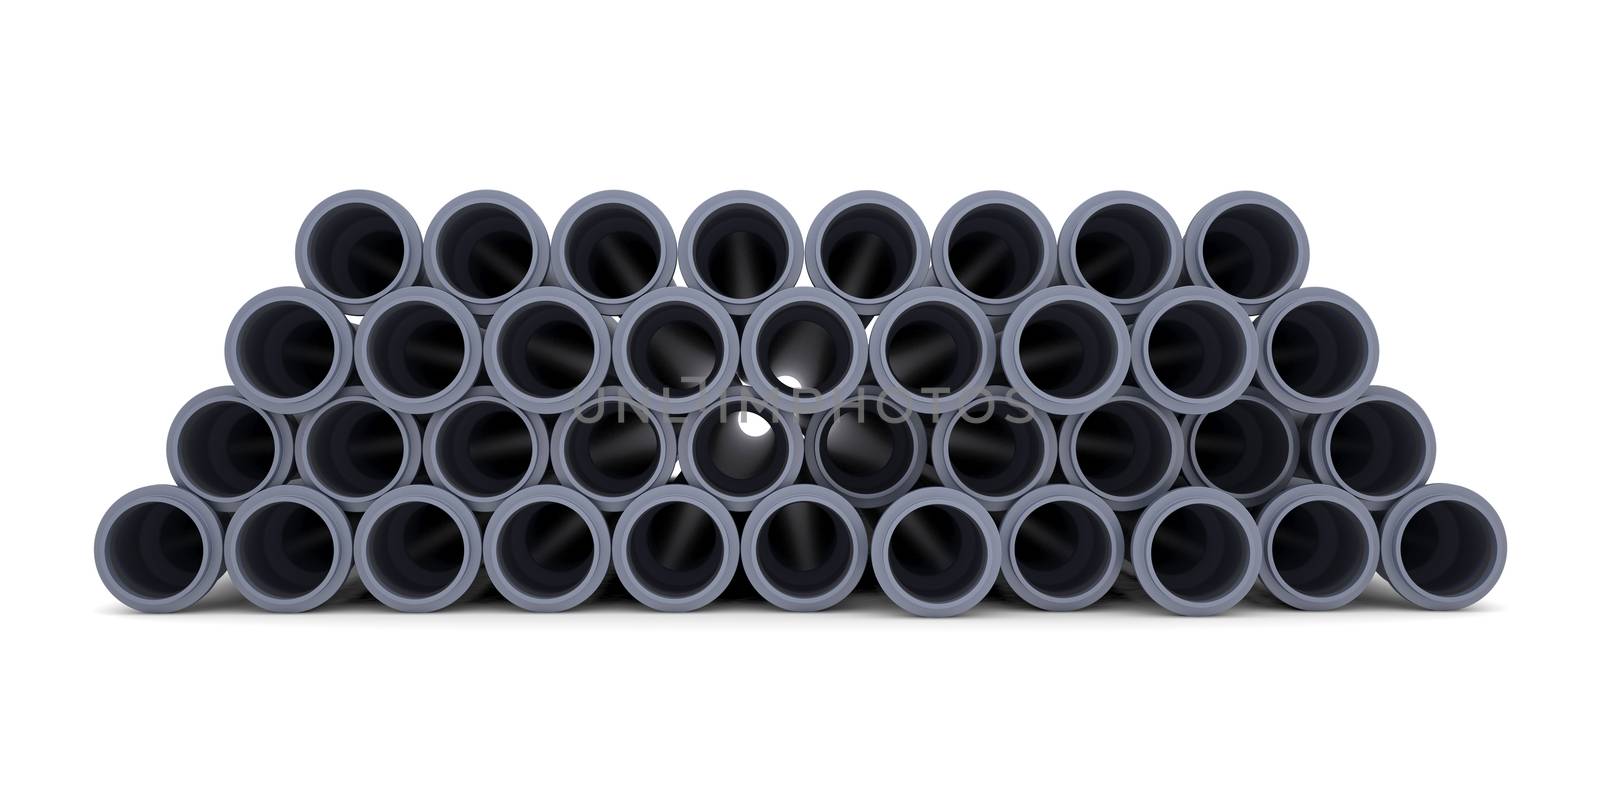 Grey PVC sewer pipes by cherezoff